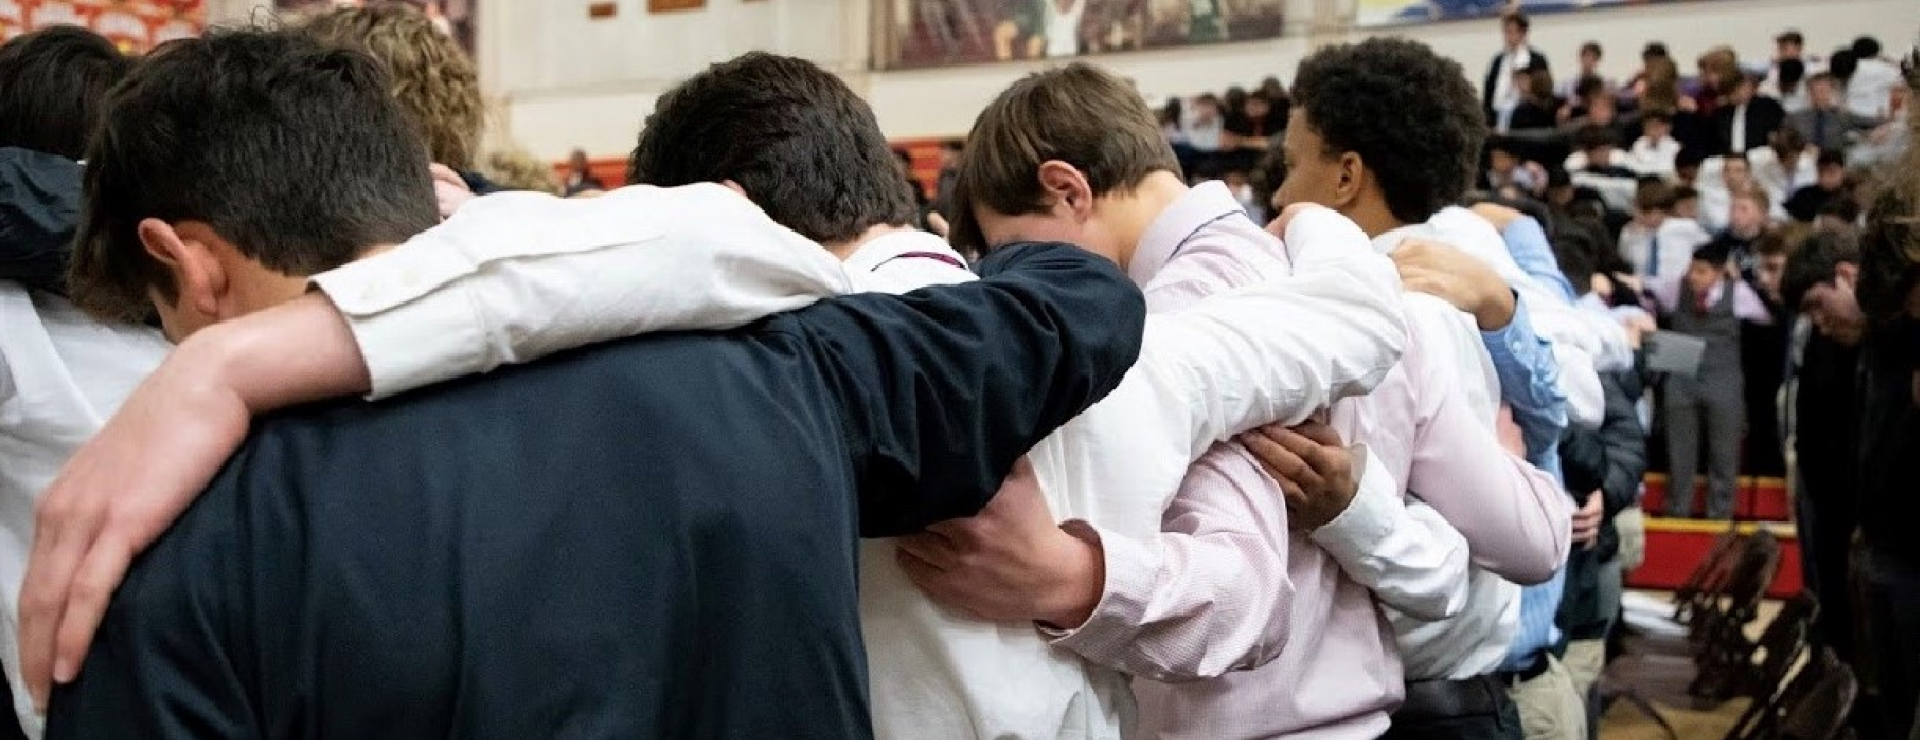 boys at Mass with hands over shoulders praying